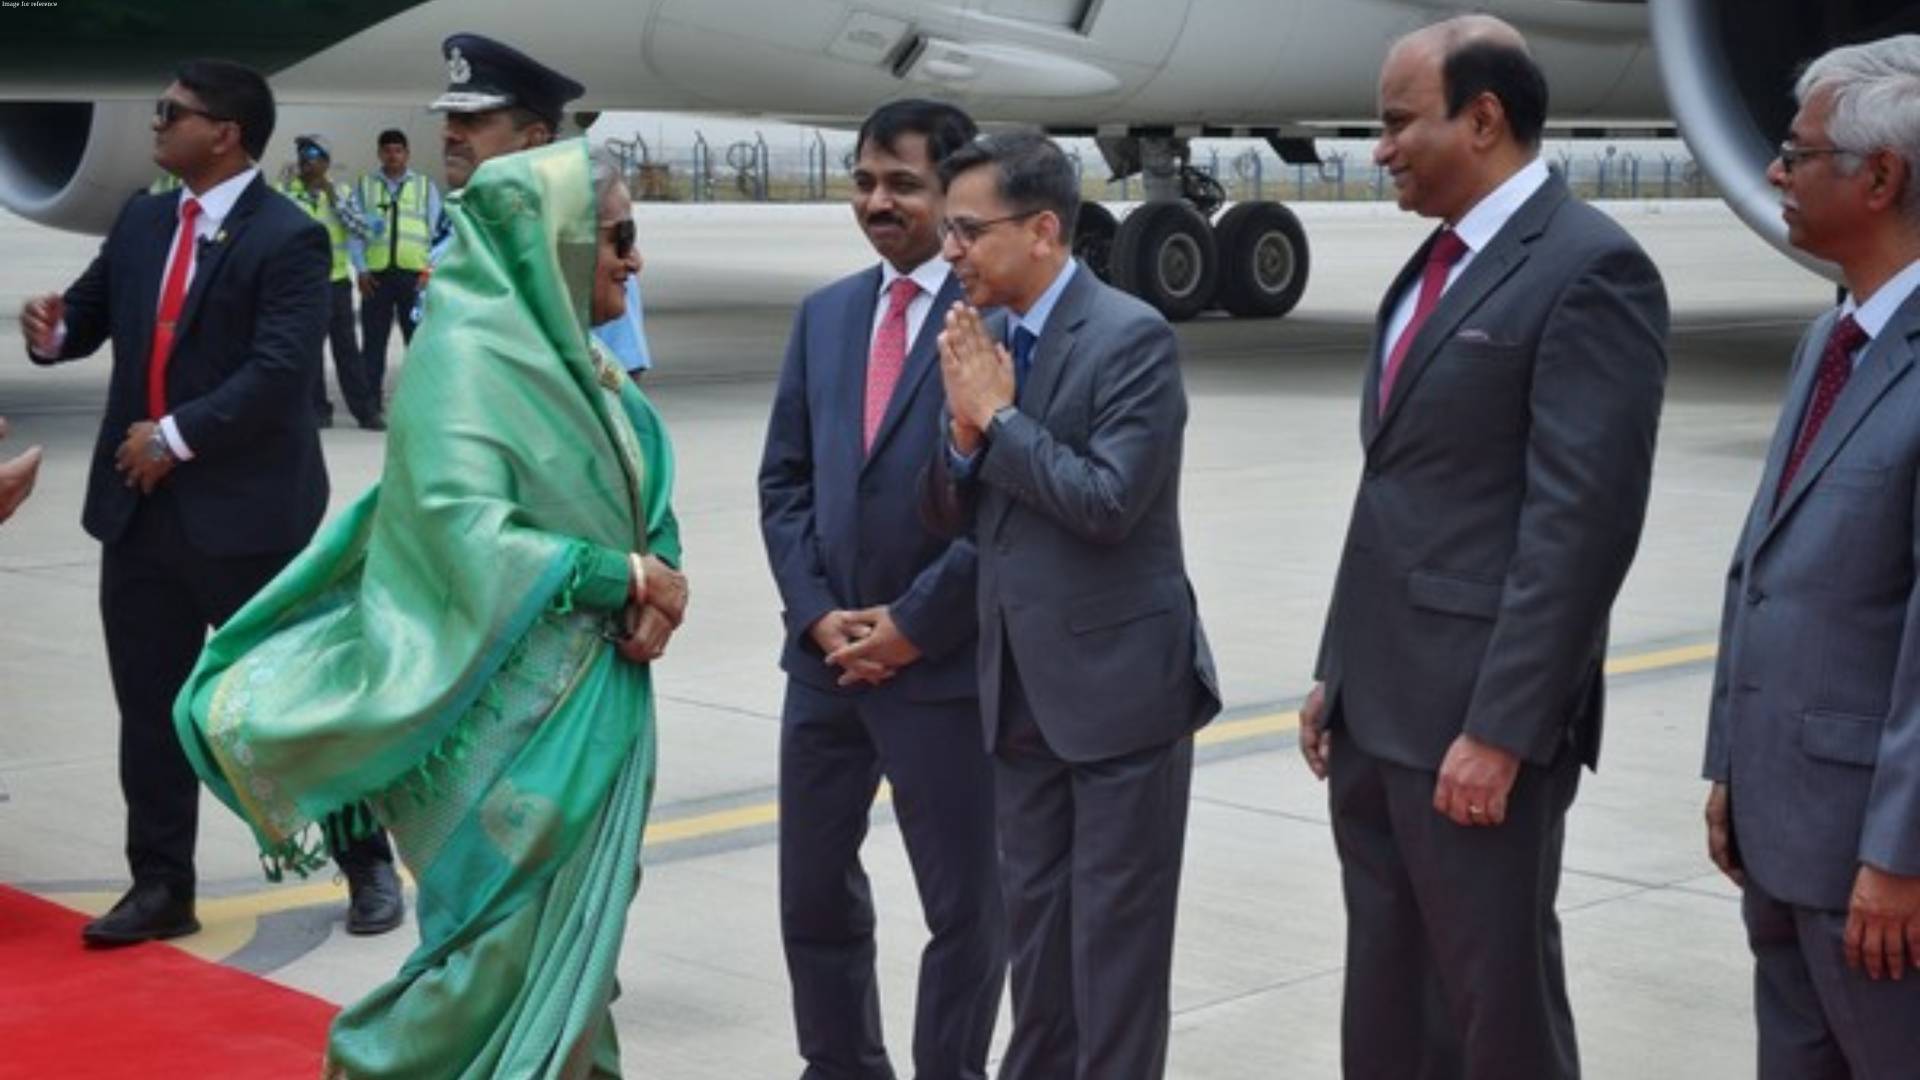 Bangladesh PM Sheikh Hasina arrives to attend PM Modi's swearing-in ceremony